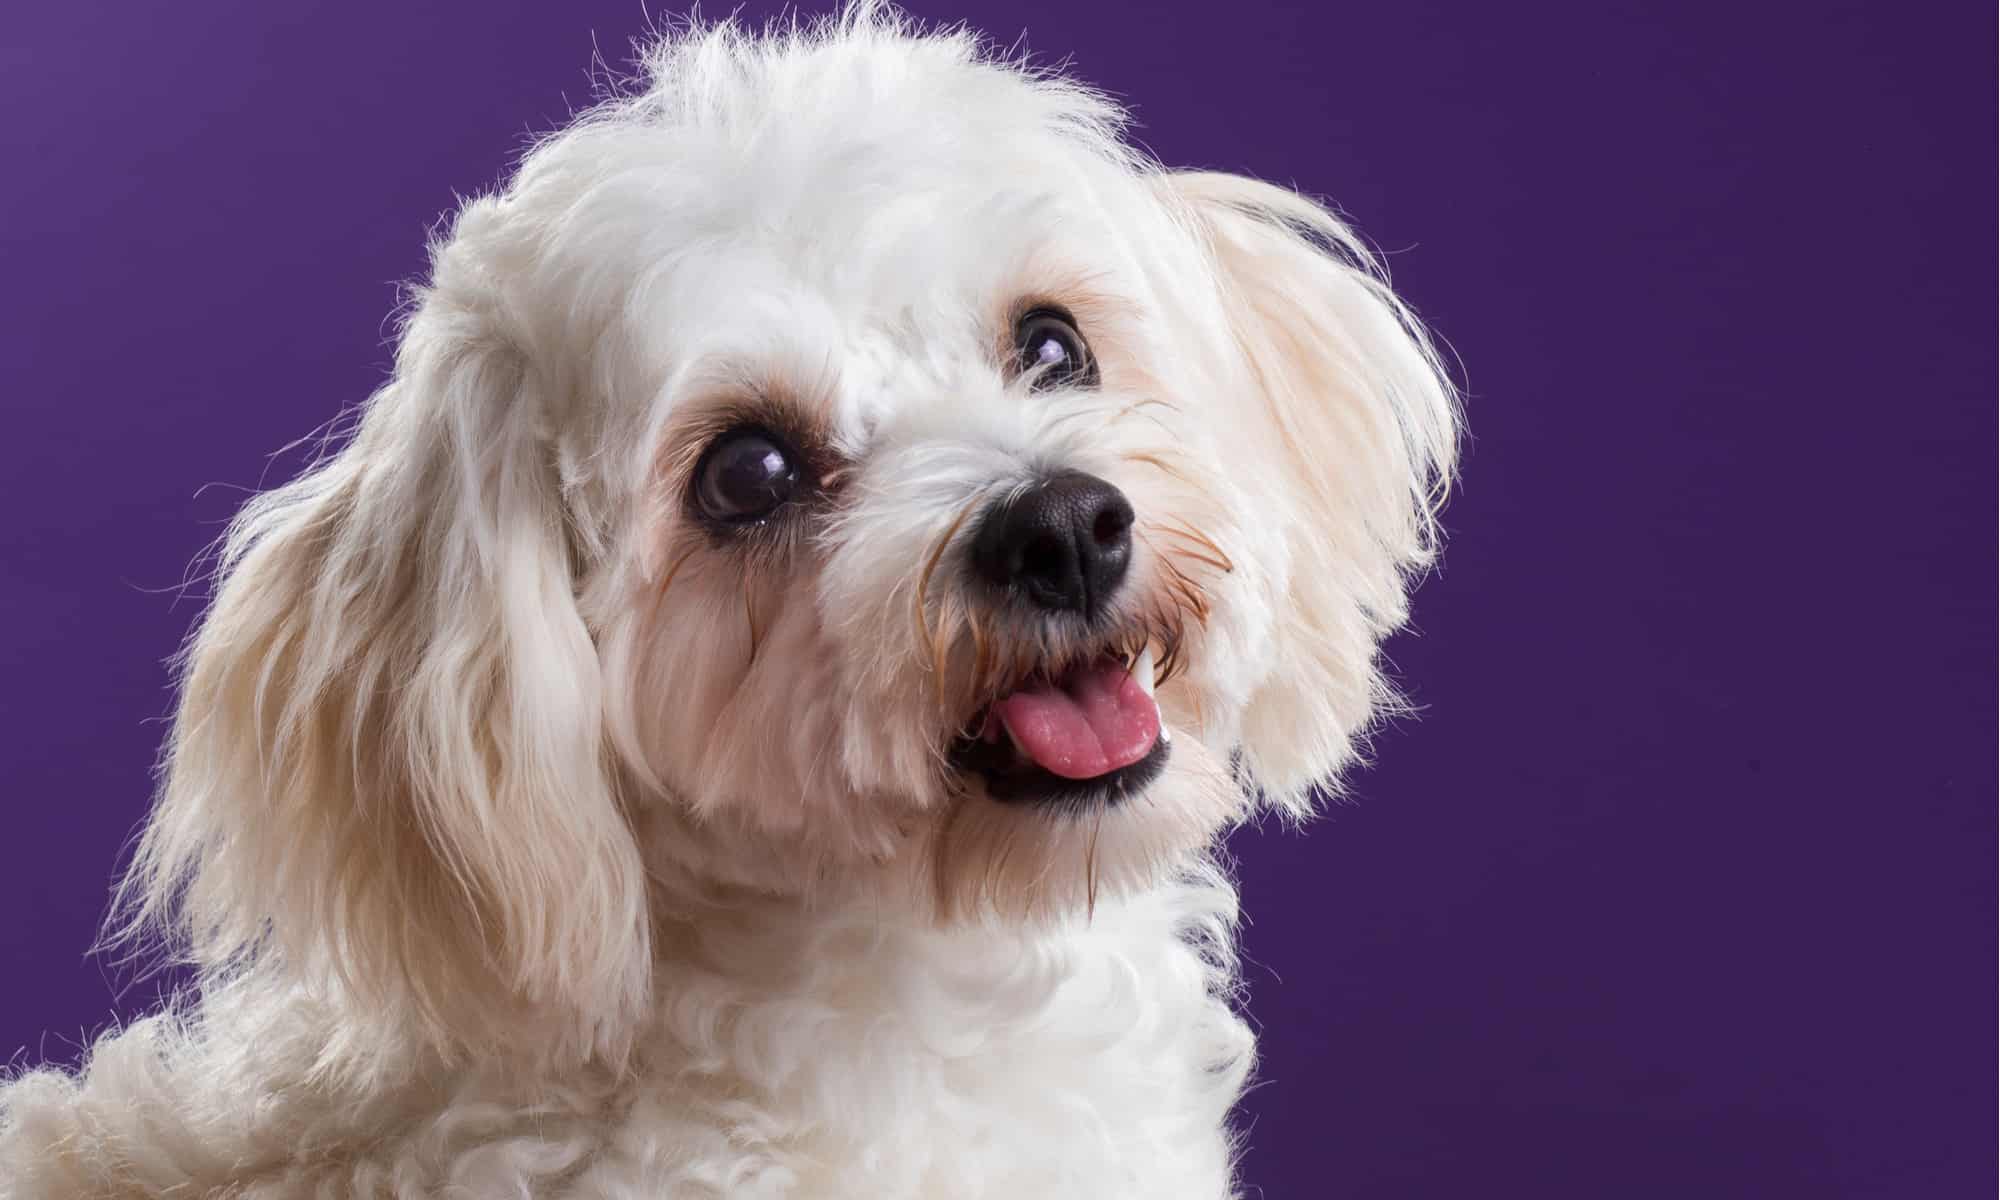 The Top 20 Designer Dog Breeds in 2023 (With Pictures)